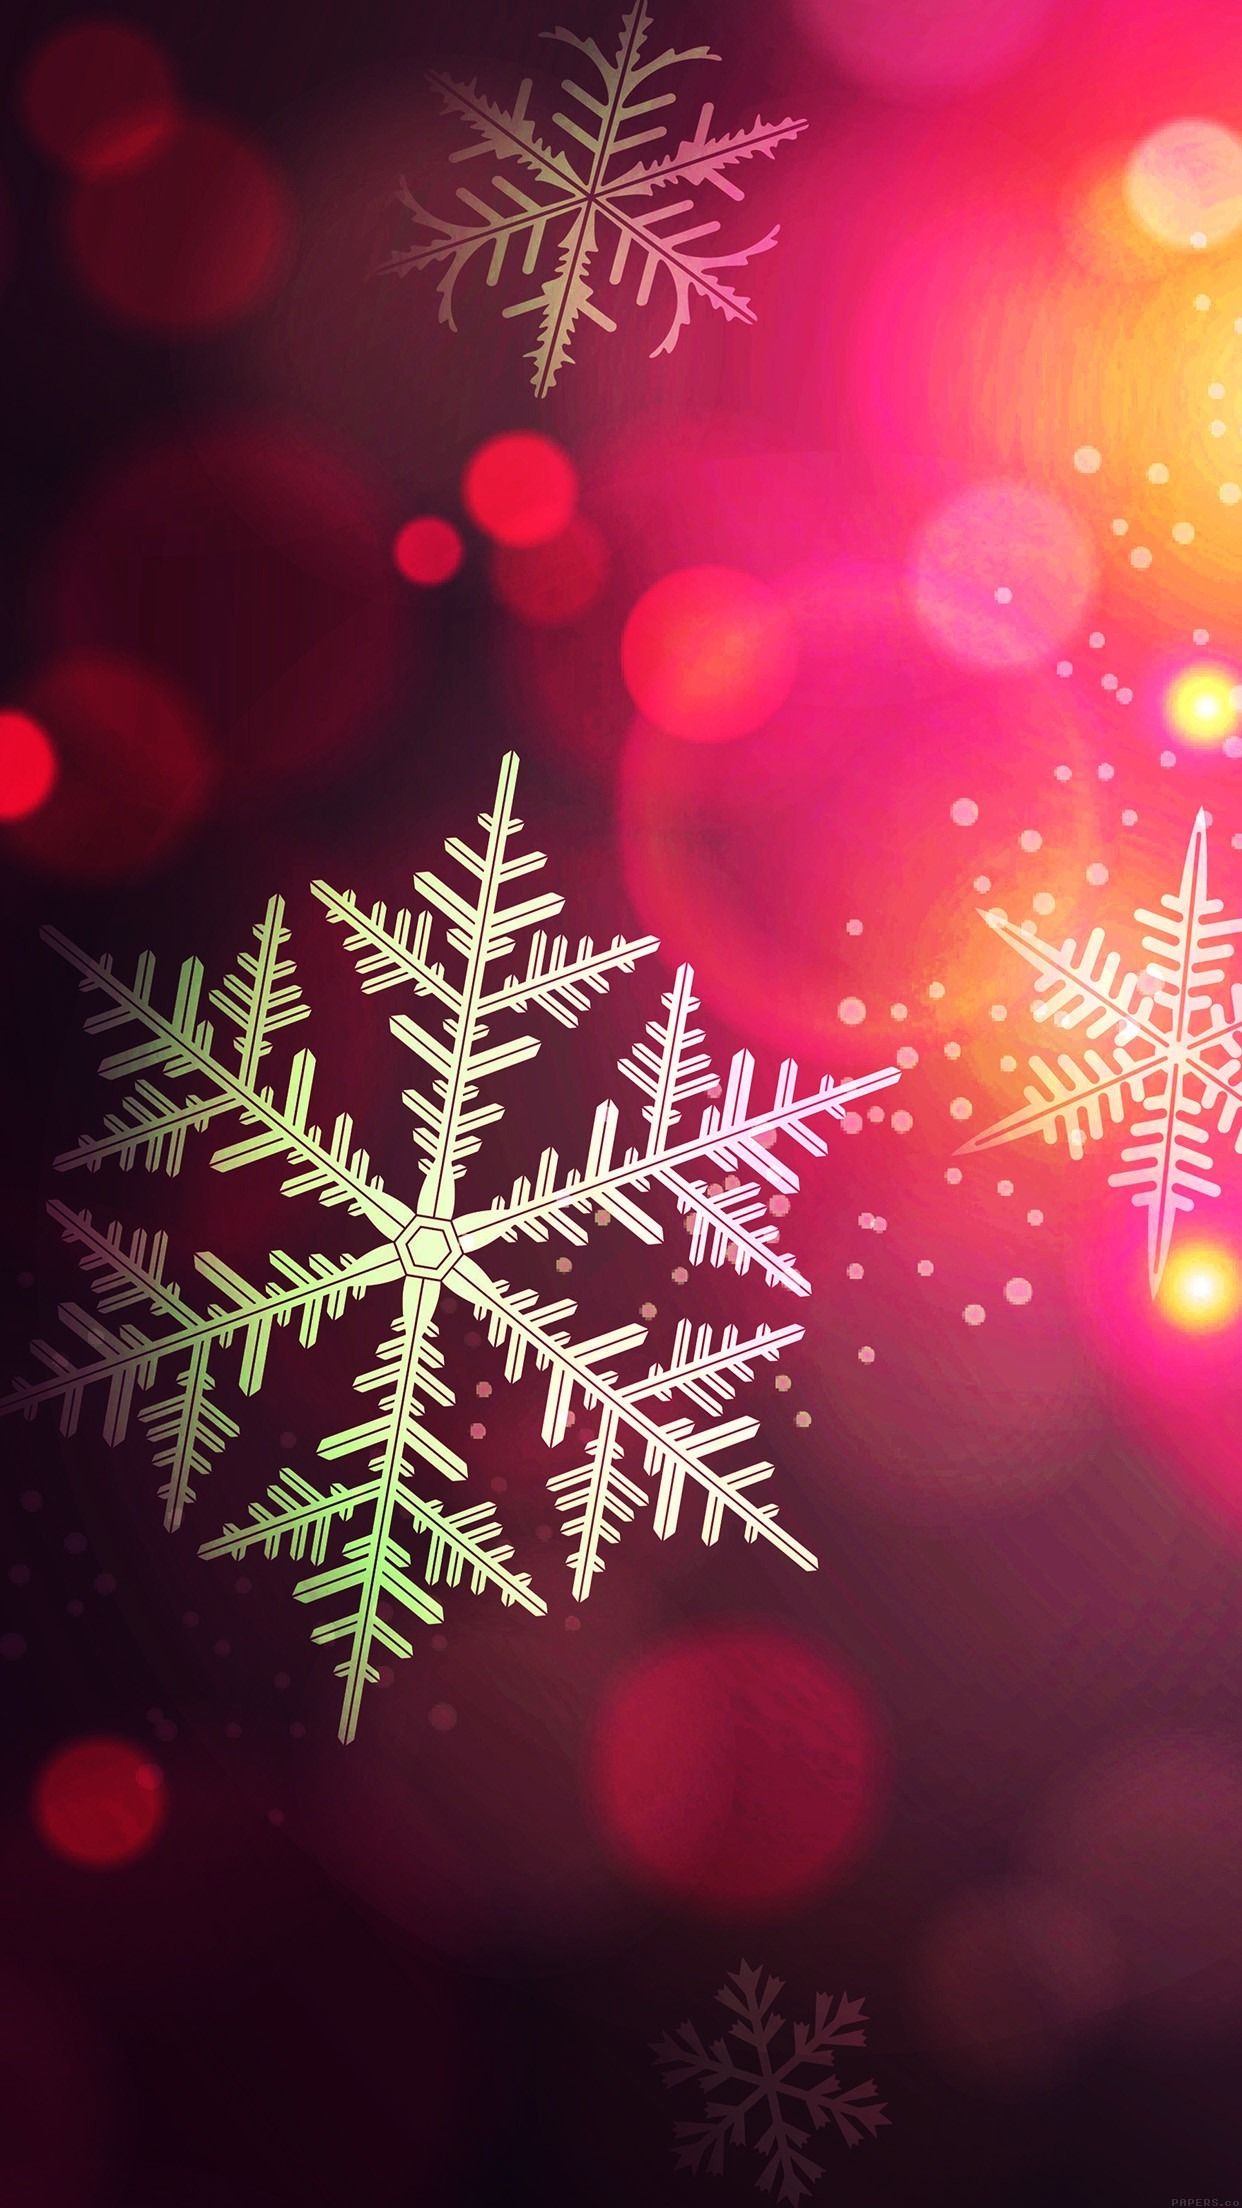 Christmas Wallpaper For Phones Throughout Christmas Wallpaper For iPhone 7 Plus